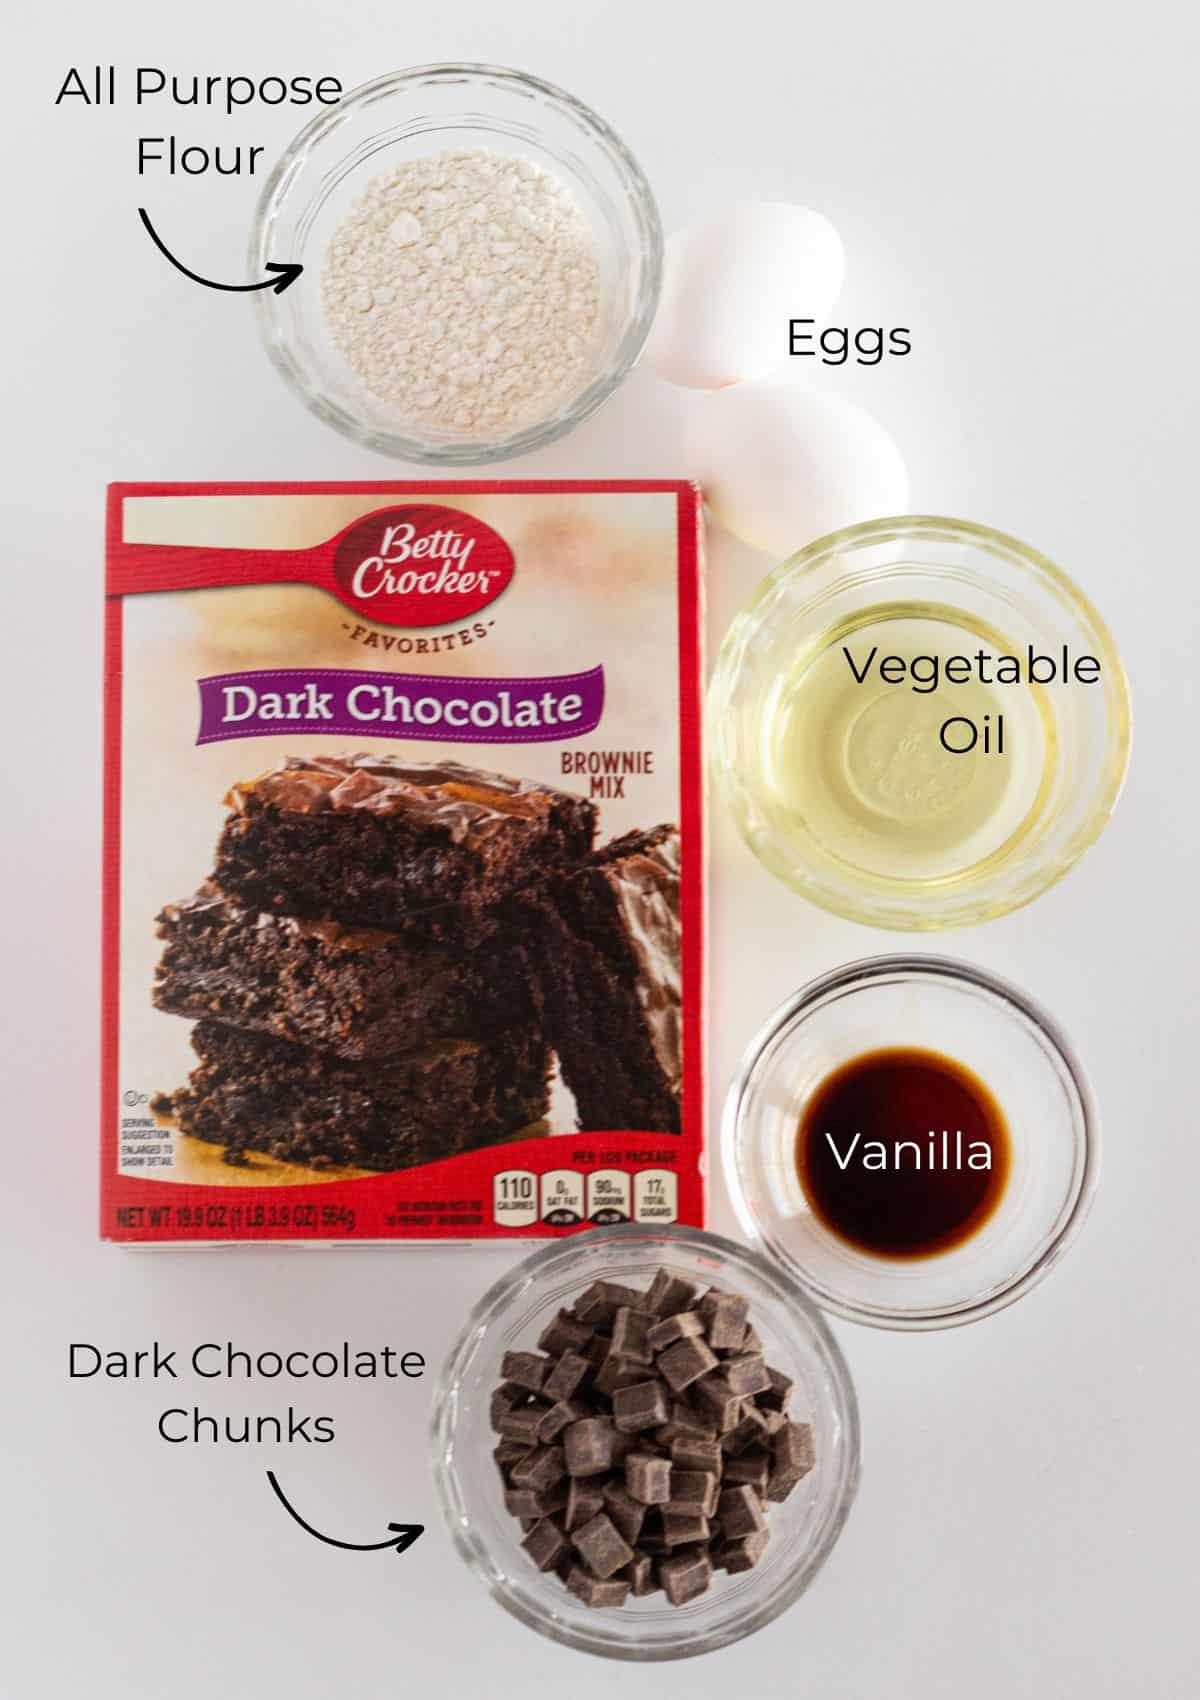 A photo of all of the ingredients needed to make Easy Dark Chocolate Chip Cookies.